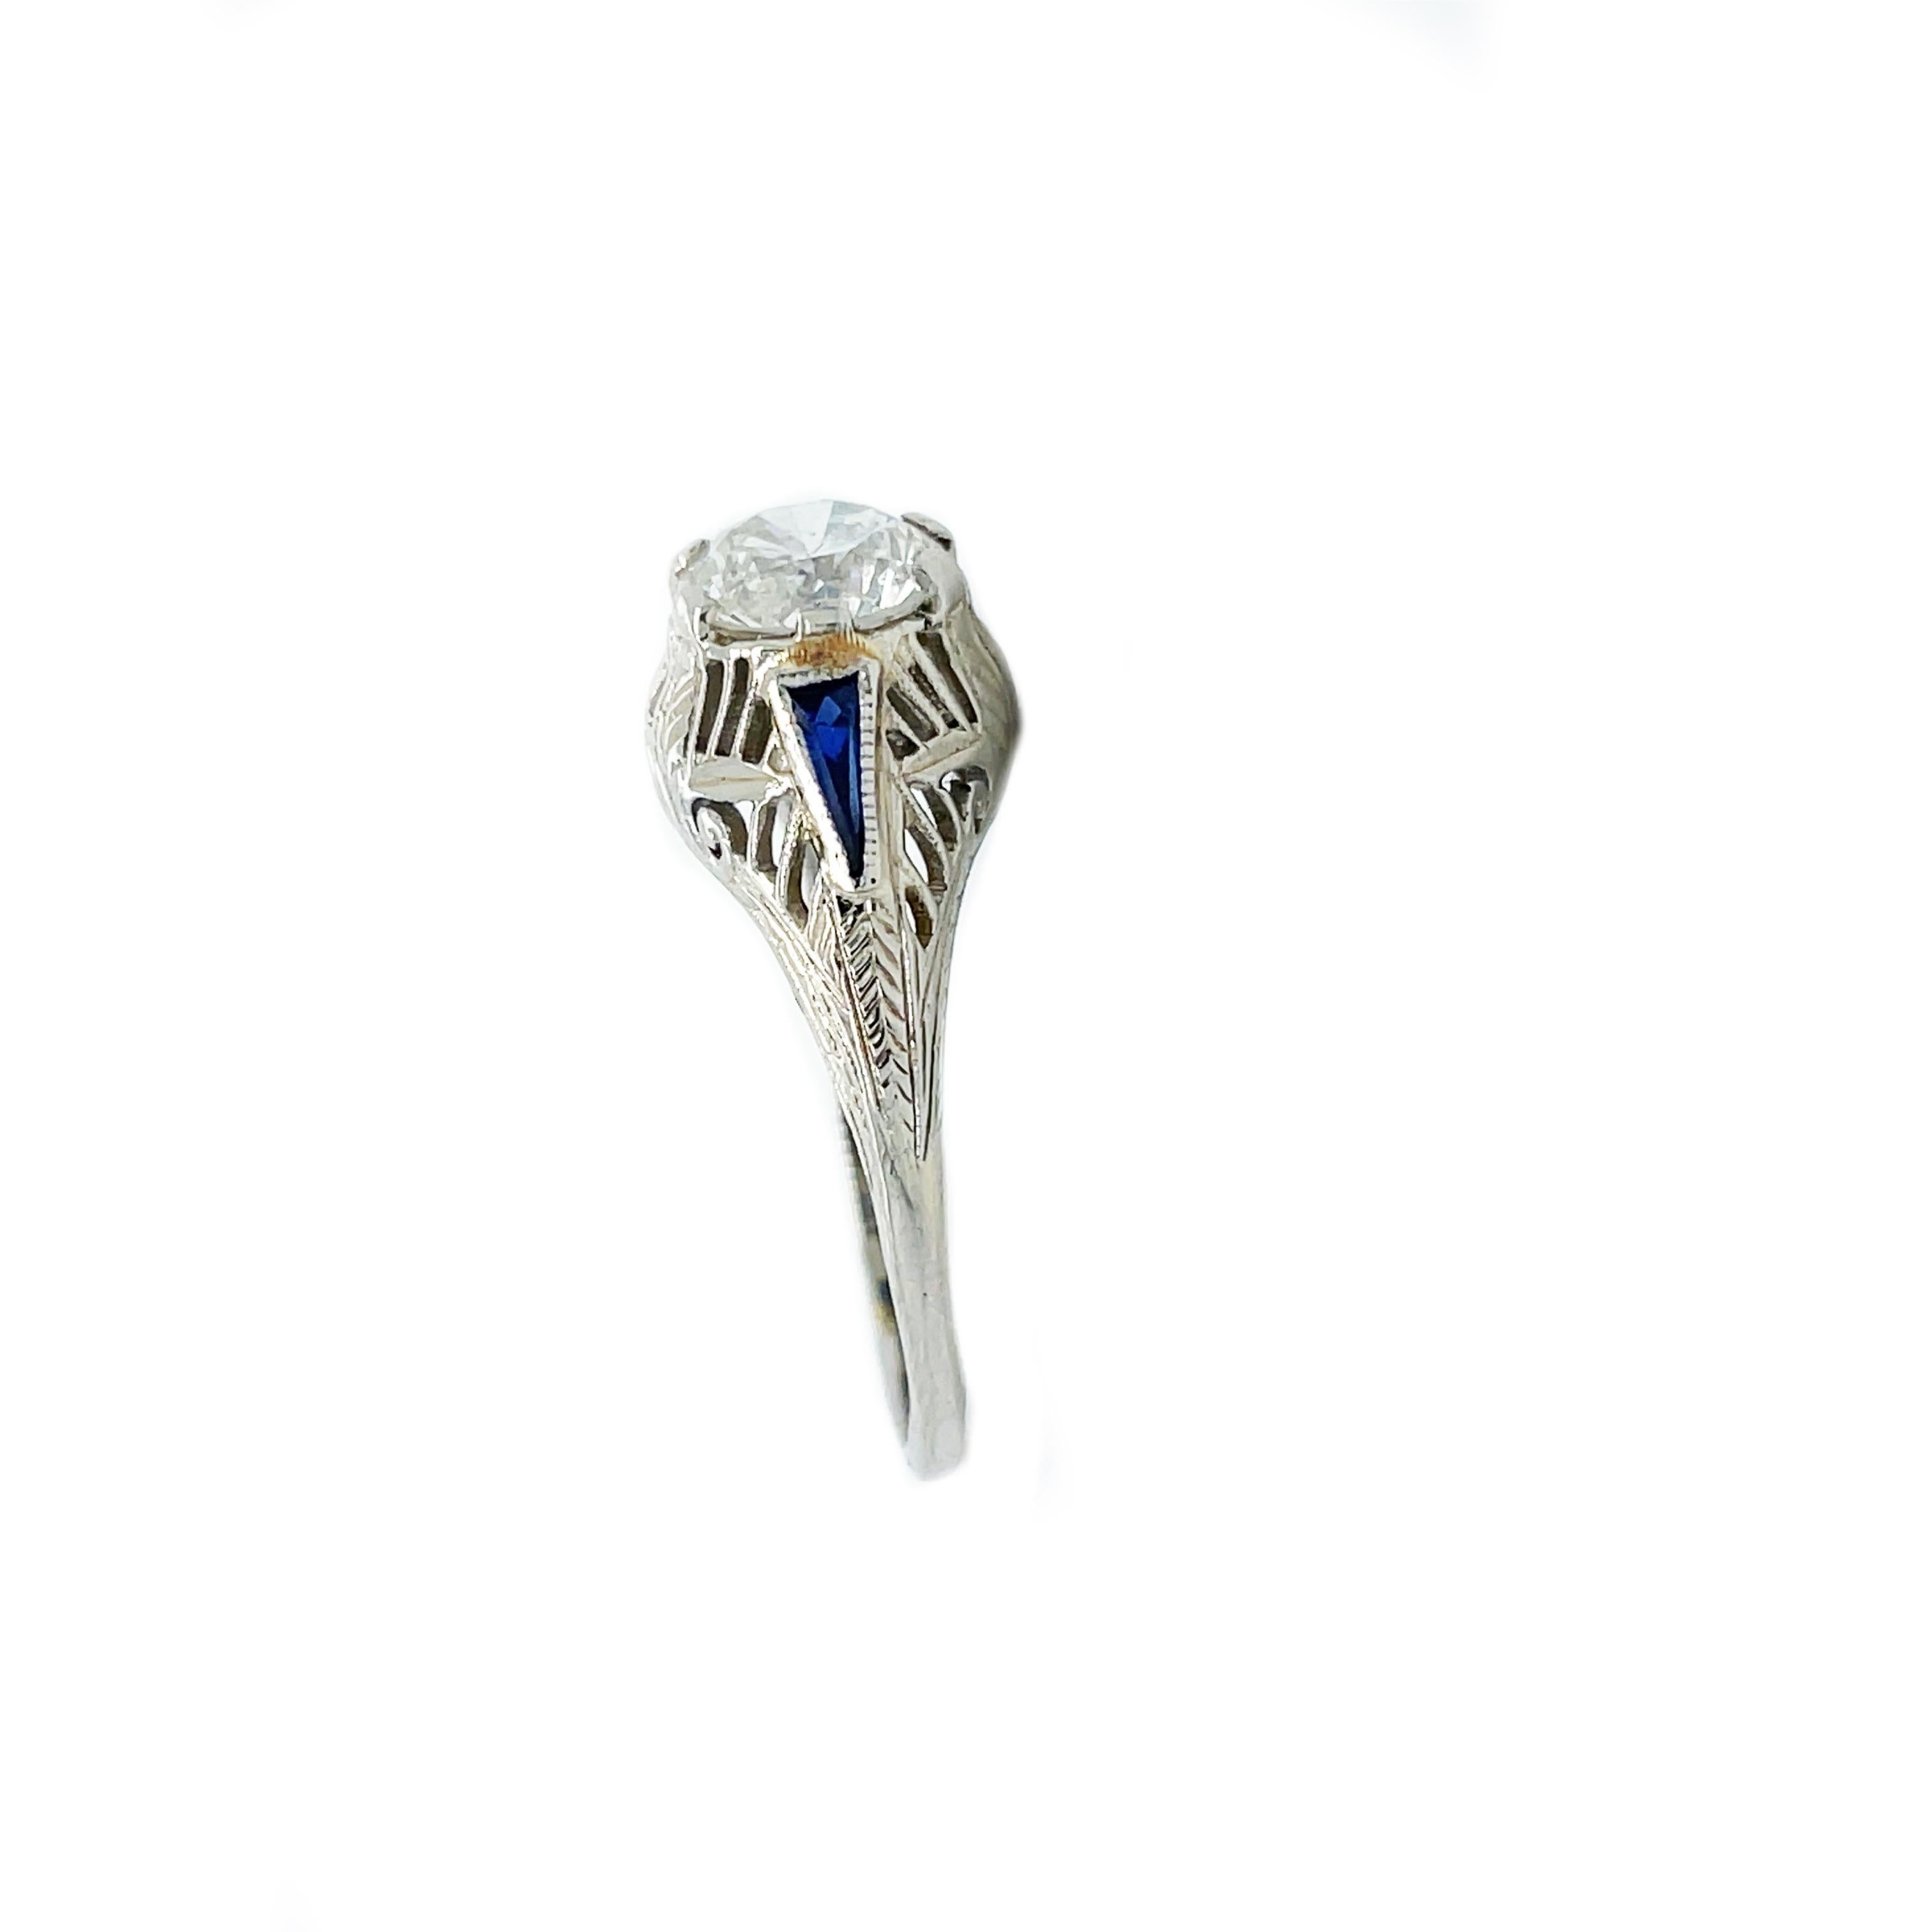 1925 Art Deco Diamond and Sapphire White Gold Ring with AGS Report For Sale 4